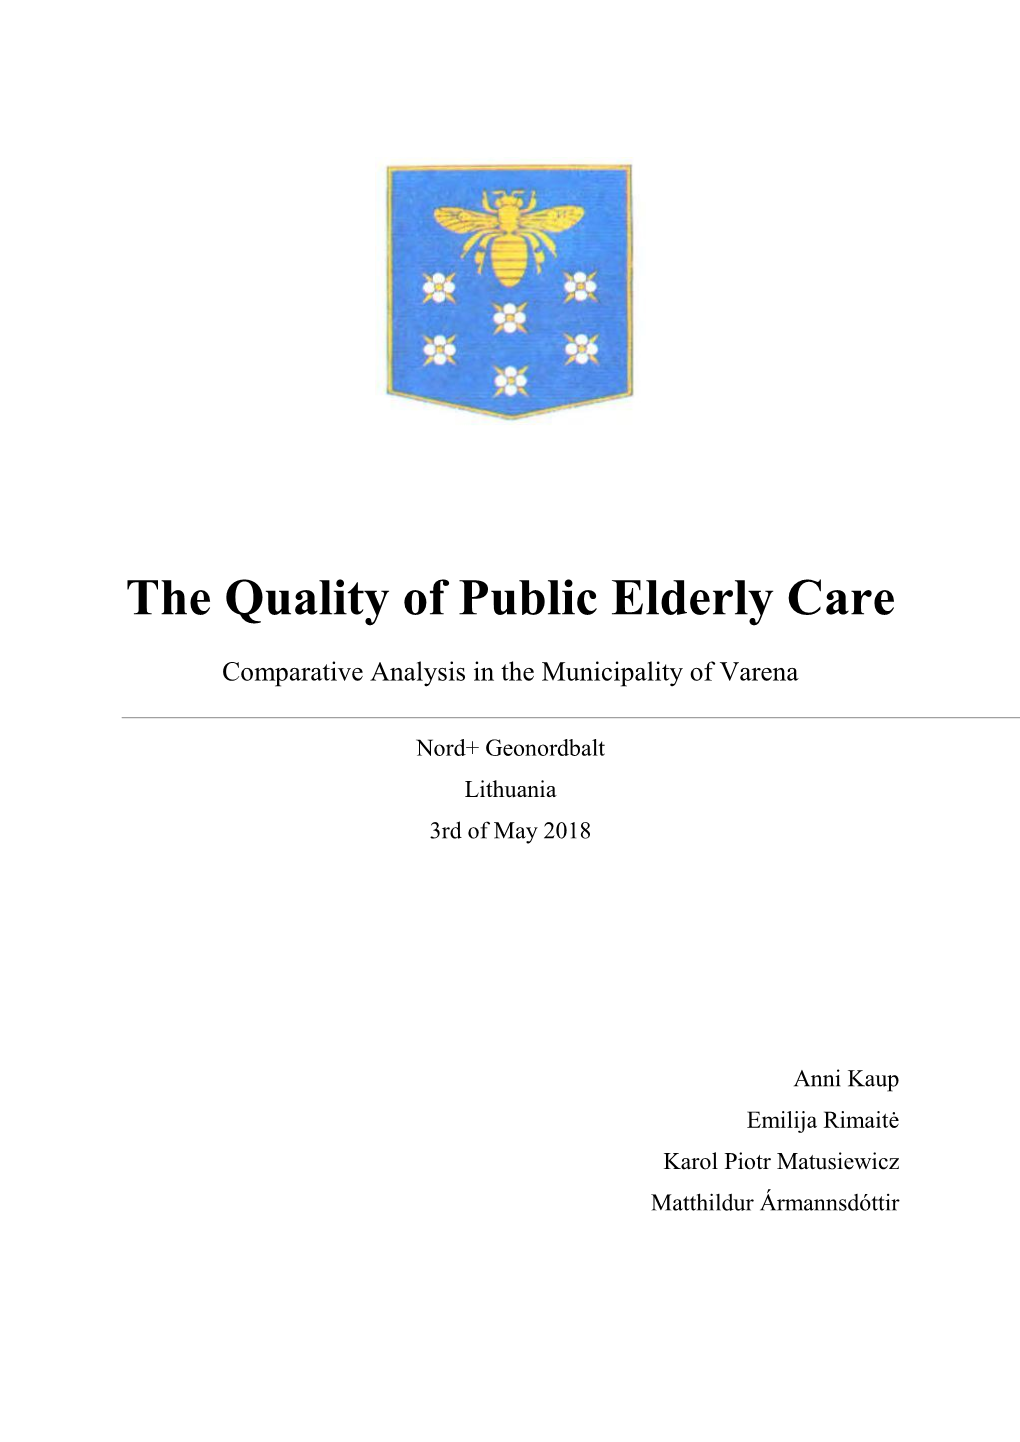 The Quality of Public Elderly Care